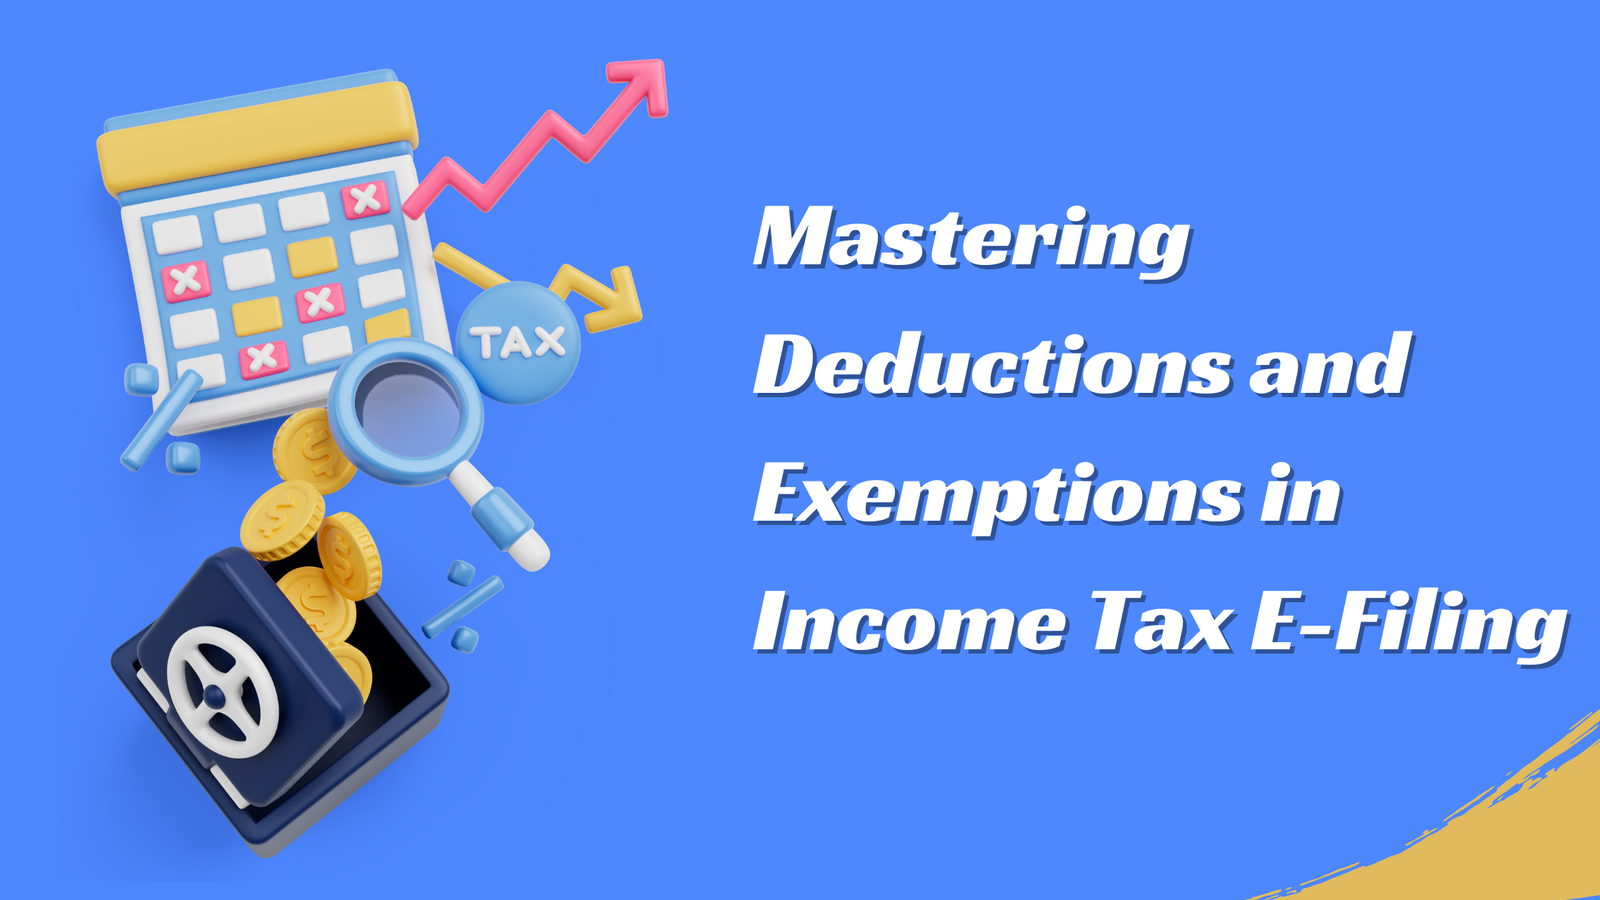 Optimizing Your Tax Savings: Mastering Deductions and Exemptions in Income Tax E-Filing